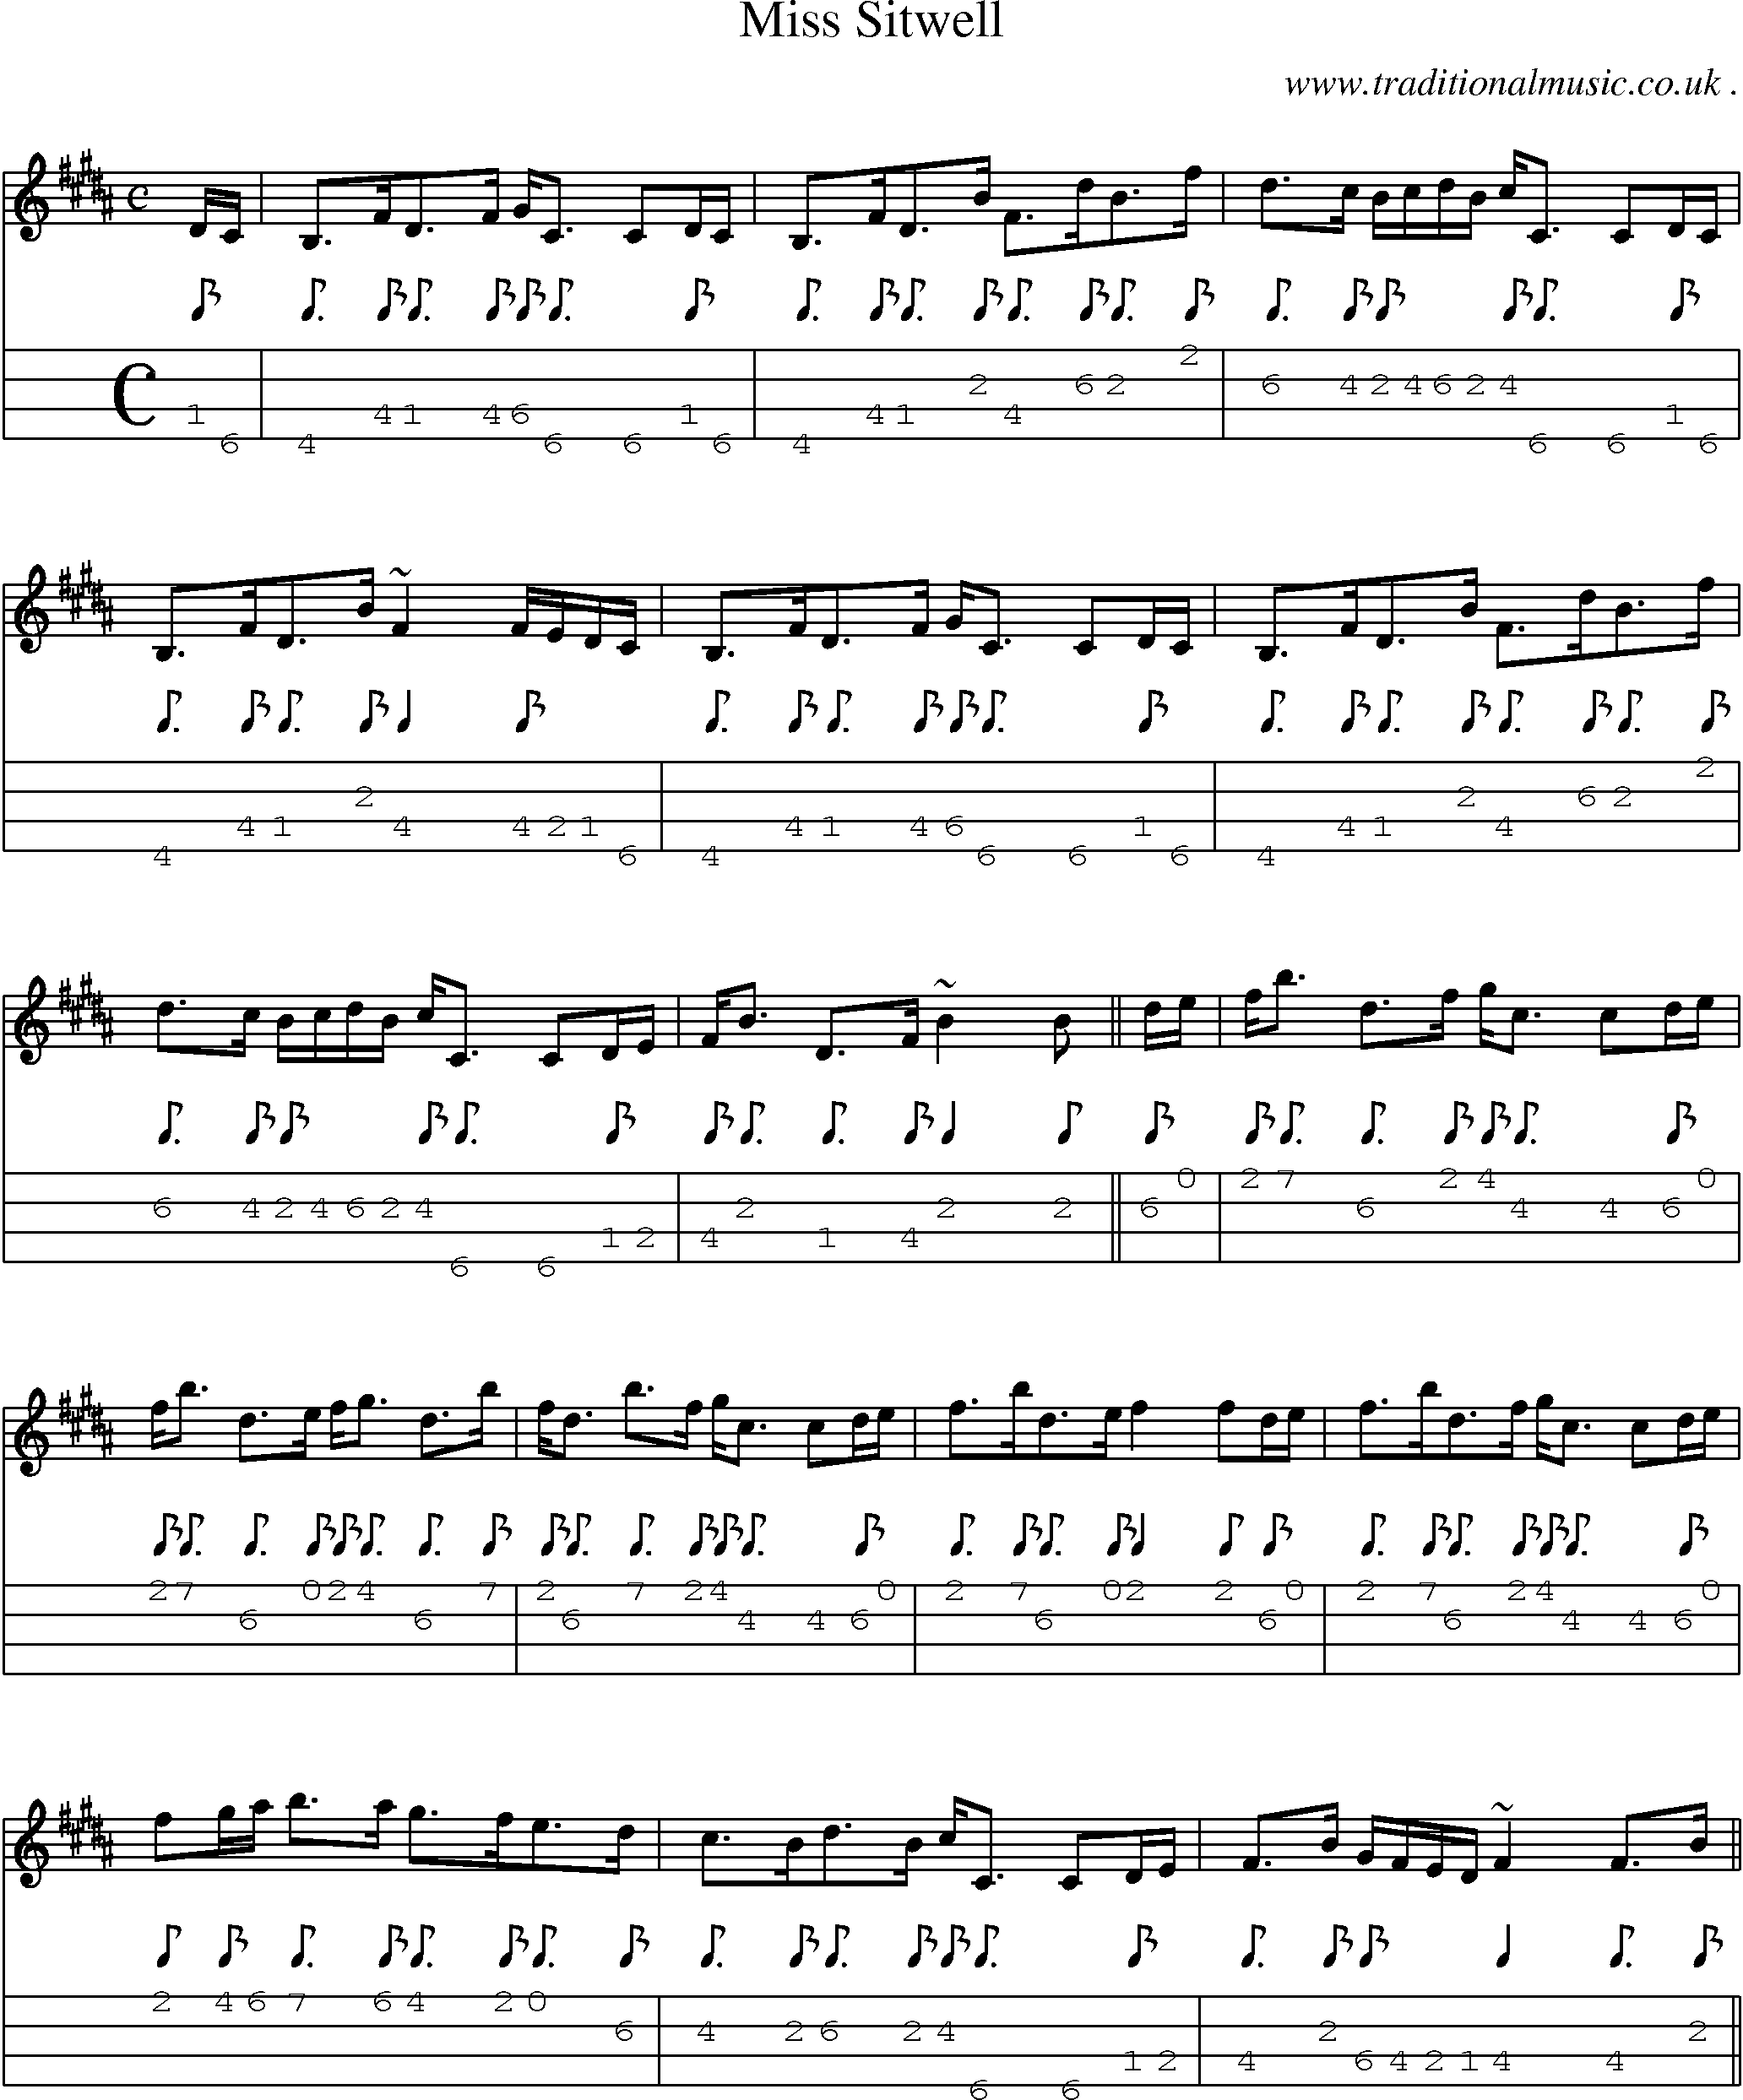 Sheet-music  score, Chords and Mandolin Tabs for Miss Sitwell